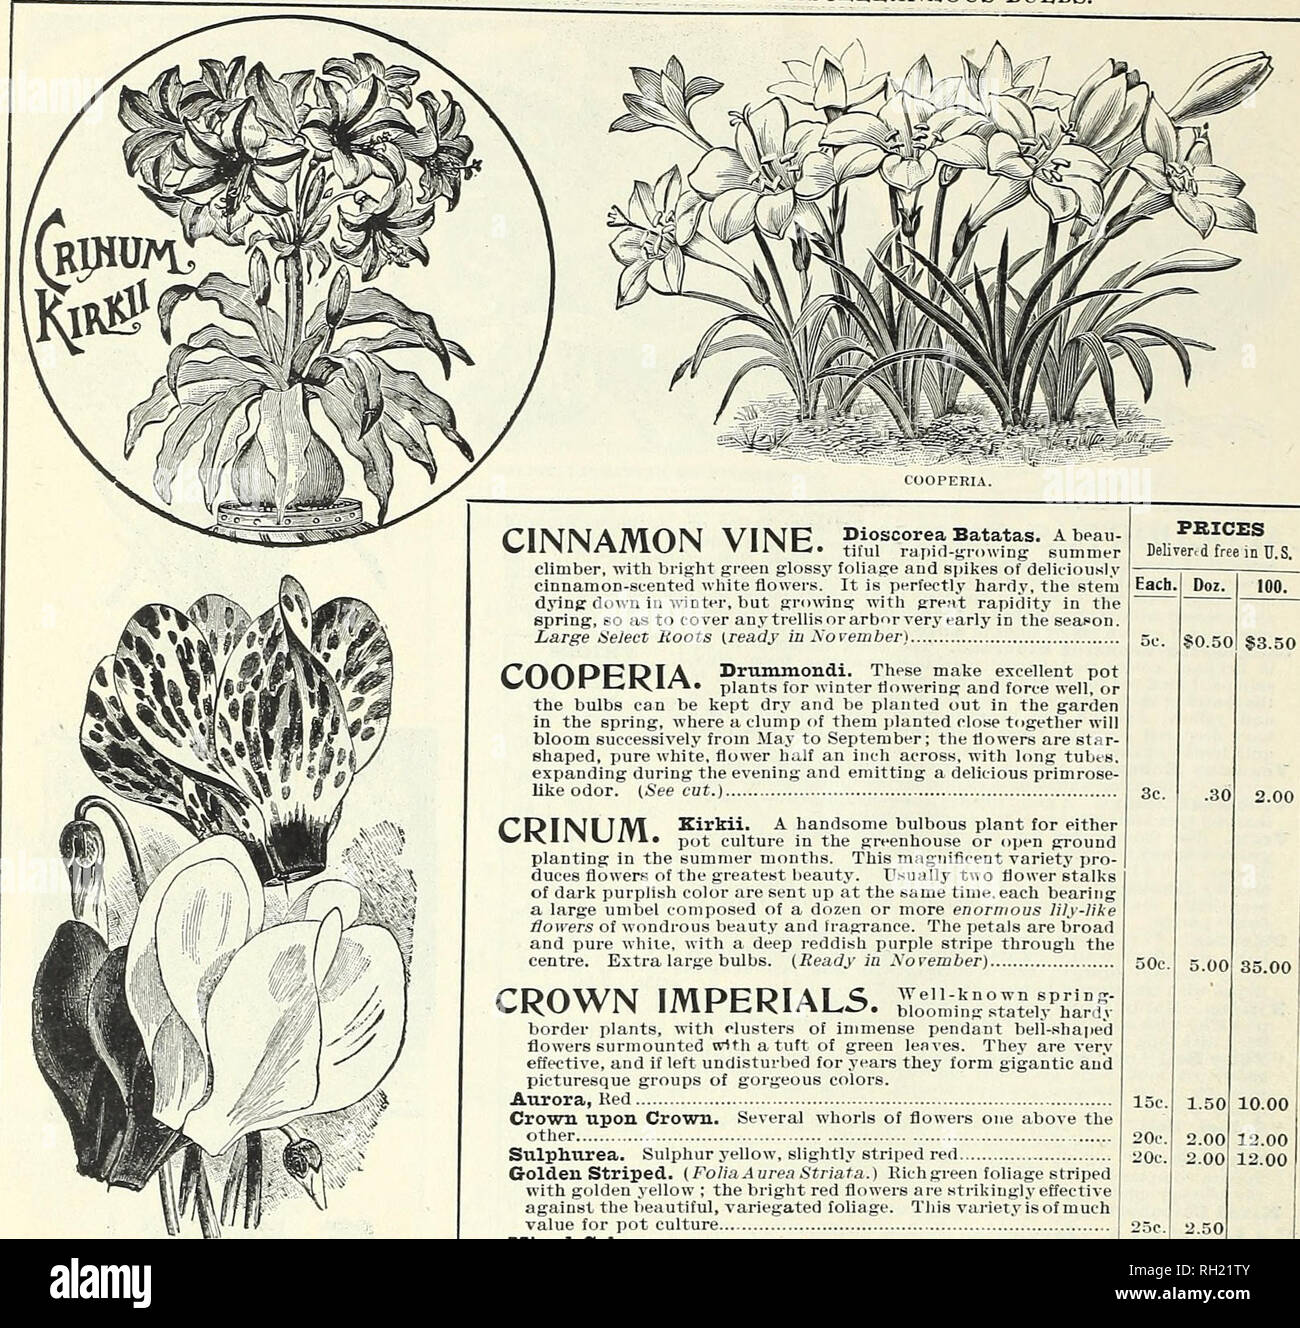 . Bulbs, plants, seeds for autumn planting : 1899. Gardening Equipment and supplies Catalogs; Seeds Catalogs; Bulbs (Plants) Catalogs; Flowers Catalogs; Flowers Seeds Catalogs. 32 PETER HENDERSON &amp; CO., NEW YORK.-MISCELLANEOUS BULBS.. COOPERIA. CINNAMON VINE. Dioscorea Batatas. A beau- tiful rapid-growing summer climber, with bright green glossy foliage and spikes of deliriously cinnamon-scented white flowers. It is perfectly hardy, the stem dying down in winter, but growing with great rapidity in the spring, so as to cover any trellis or arbor very early in the season. Large Select Moots  Stock Photo